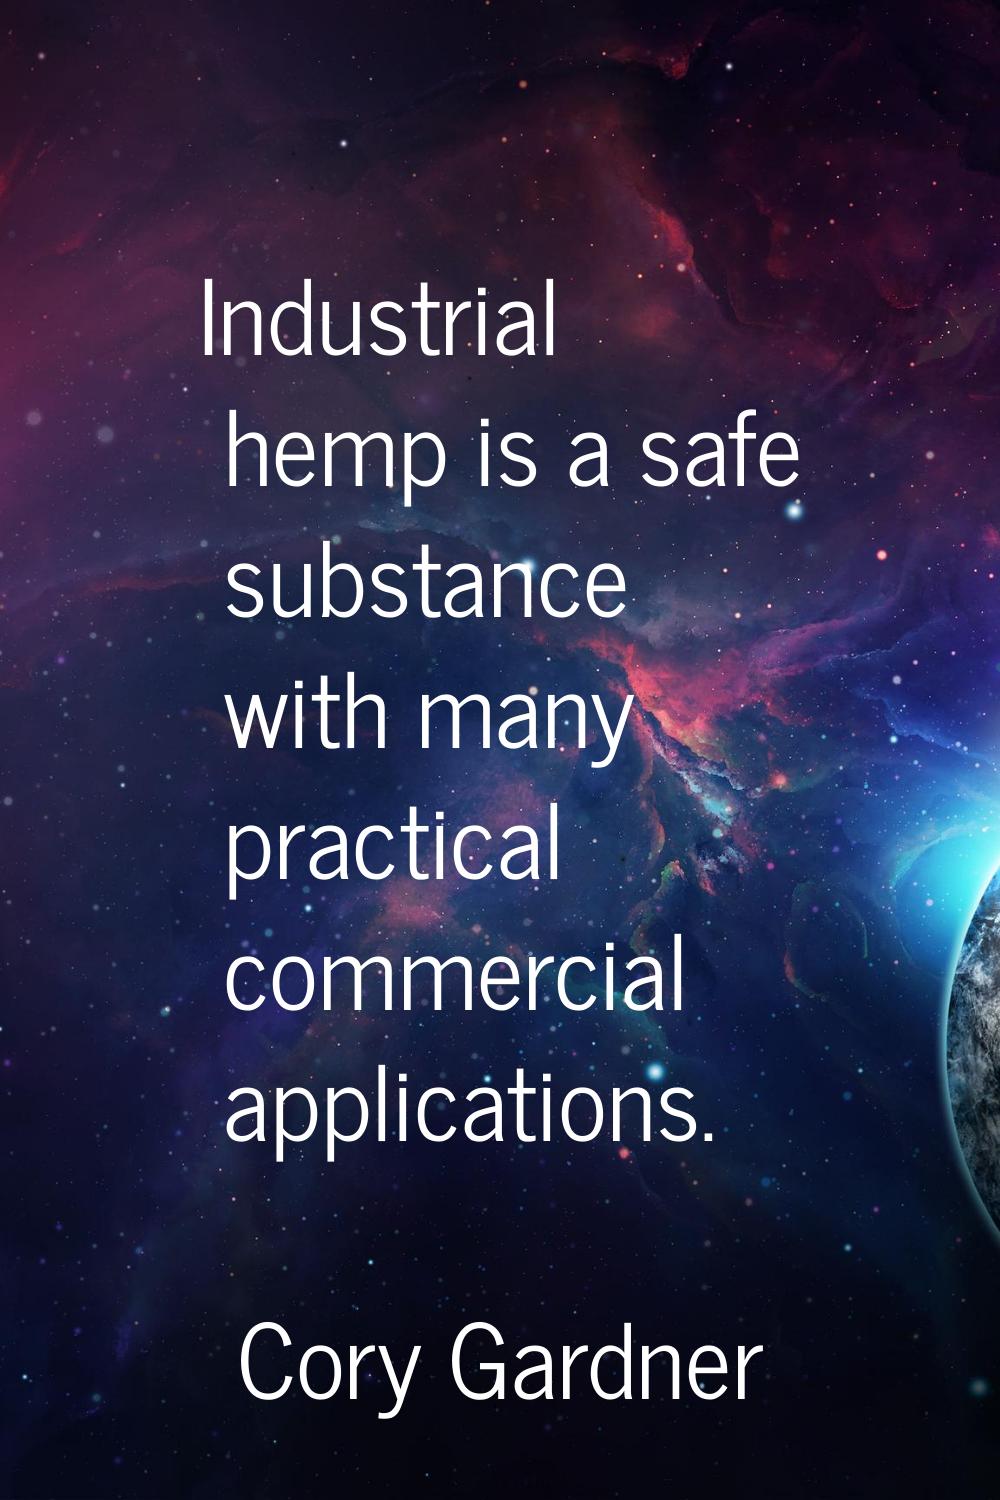 Industrial hemp is a safe substance with many practical commercial applications.